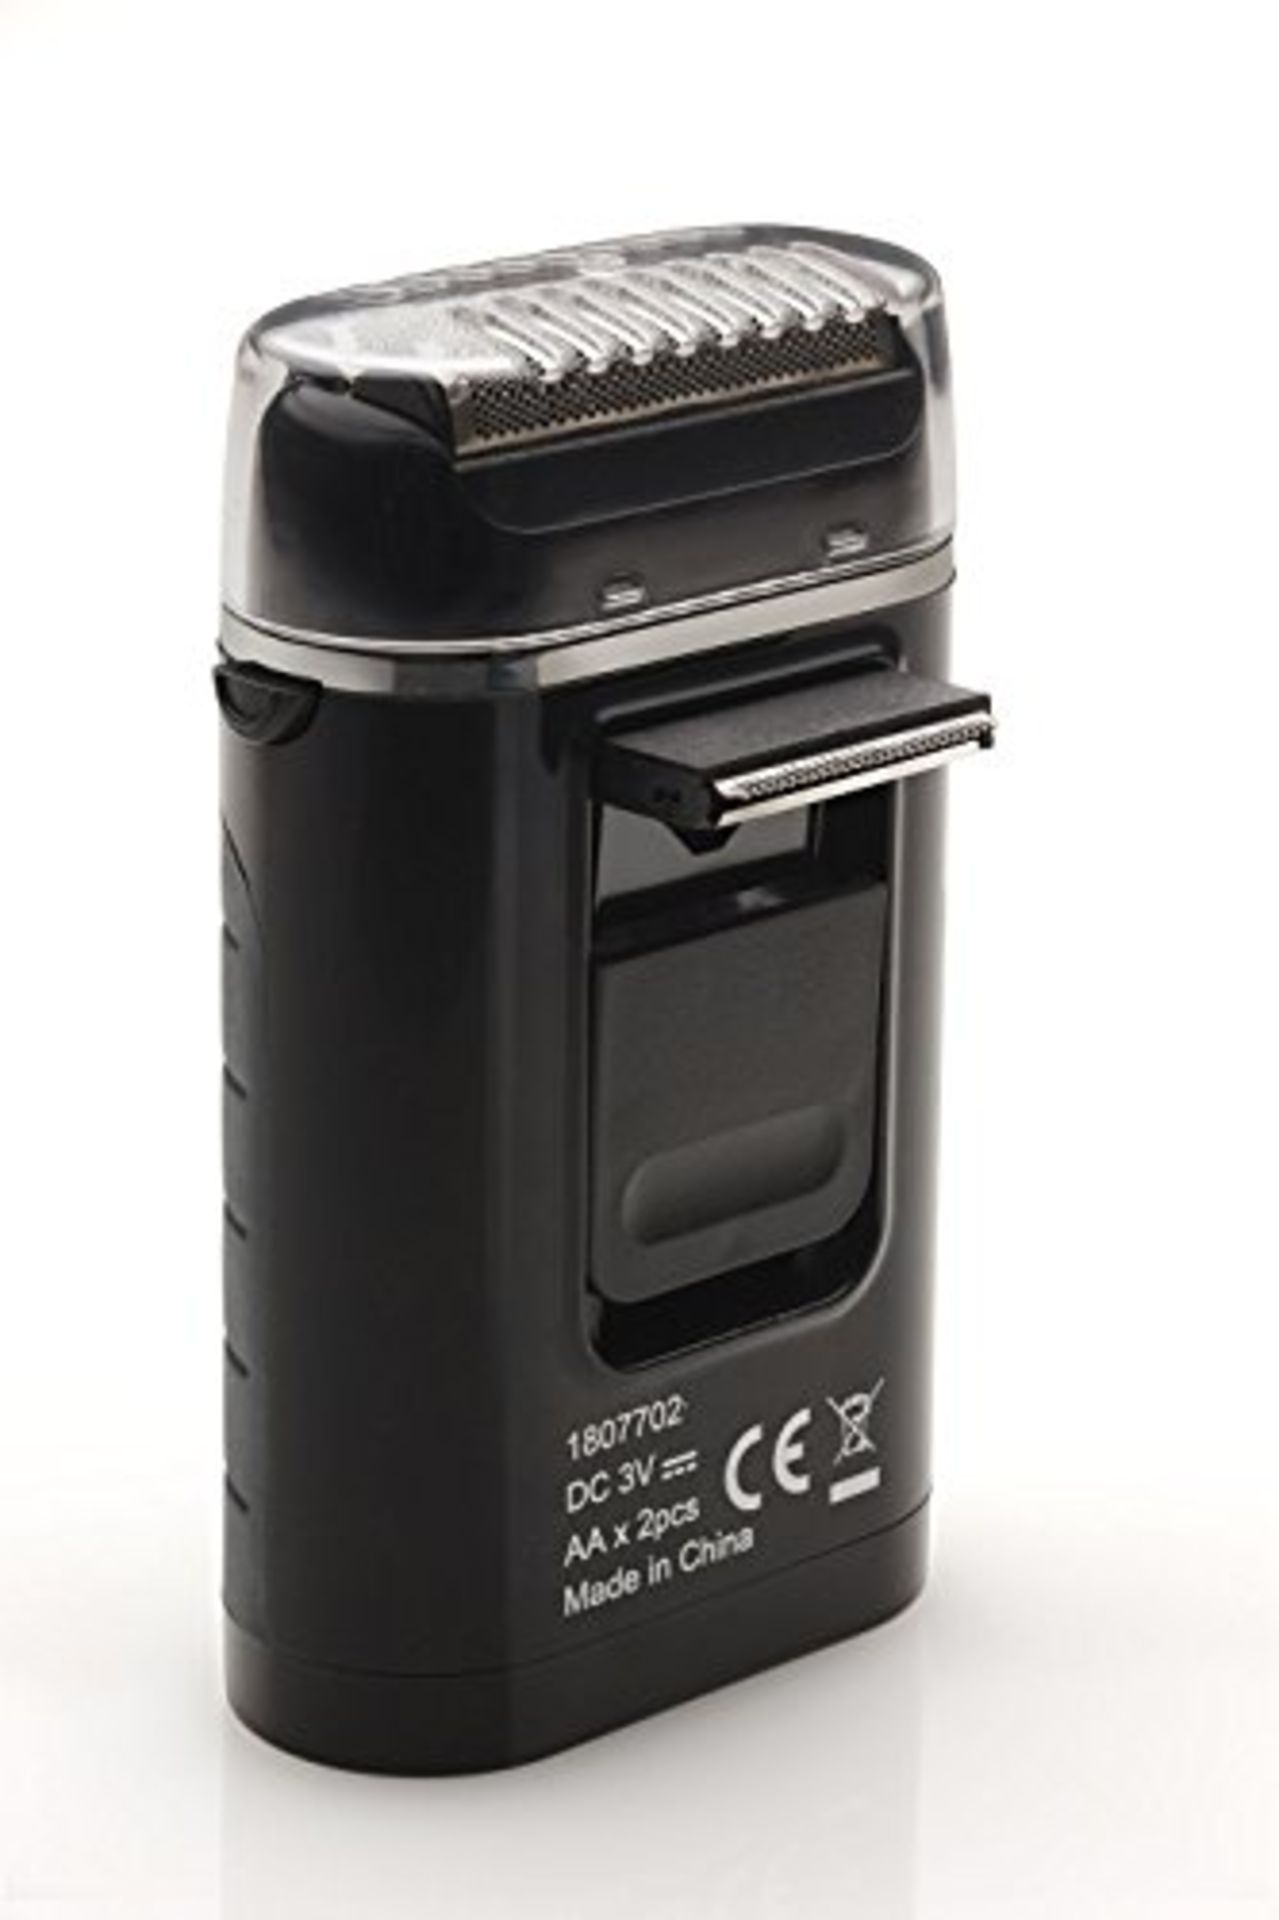 V *TRADE QTY* Brand New Carrera Electric Gents Shaver - Ebay Price £14.95 X 10 YOUR BID PRICE TO